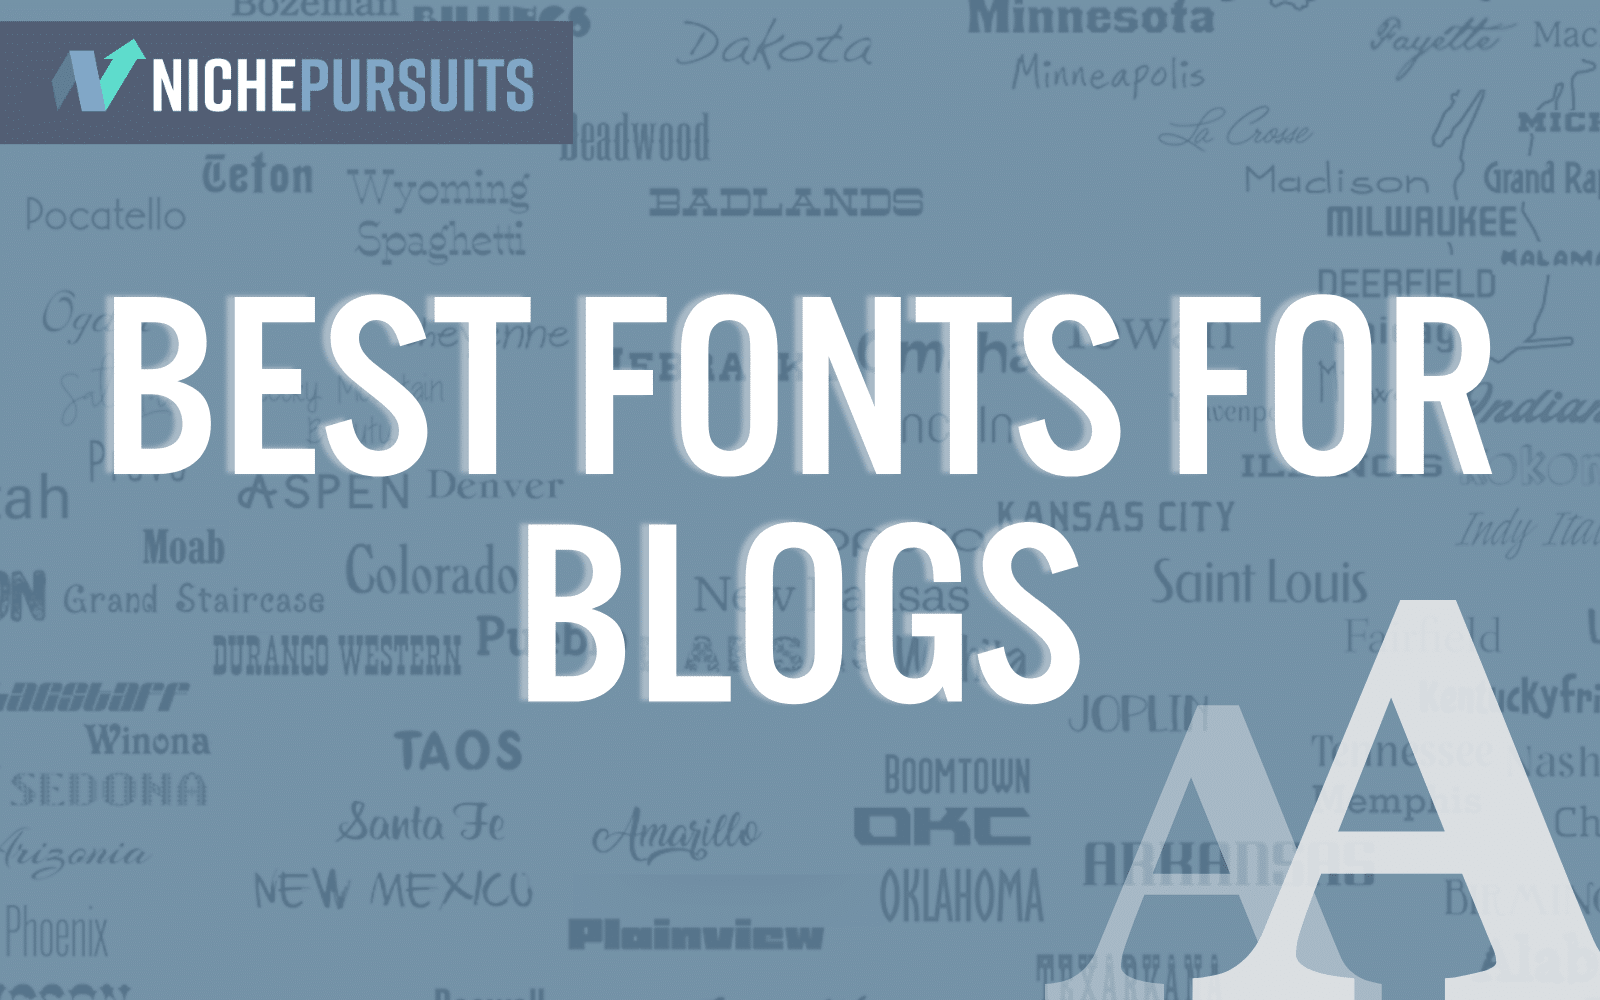 Design Update: New fonts! · Global Voices Community Blog